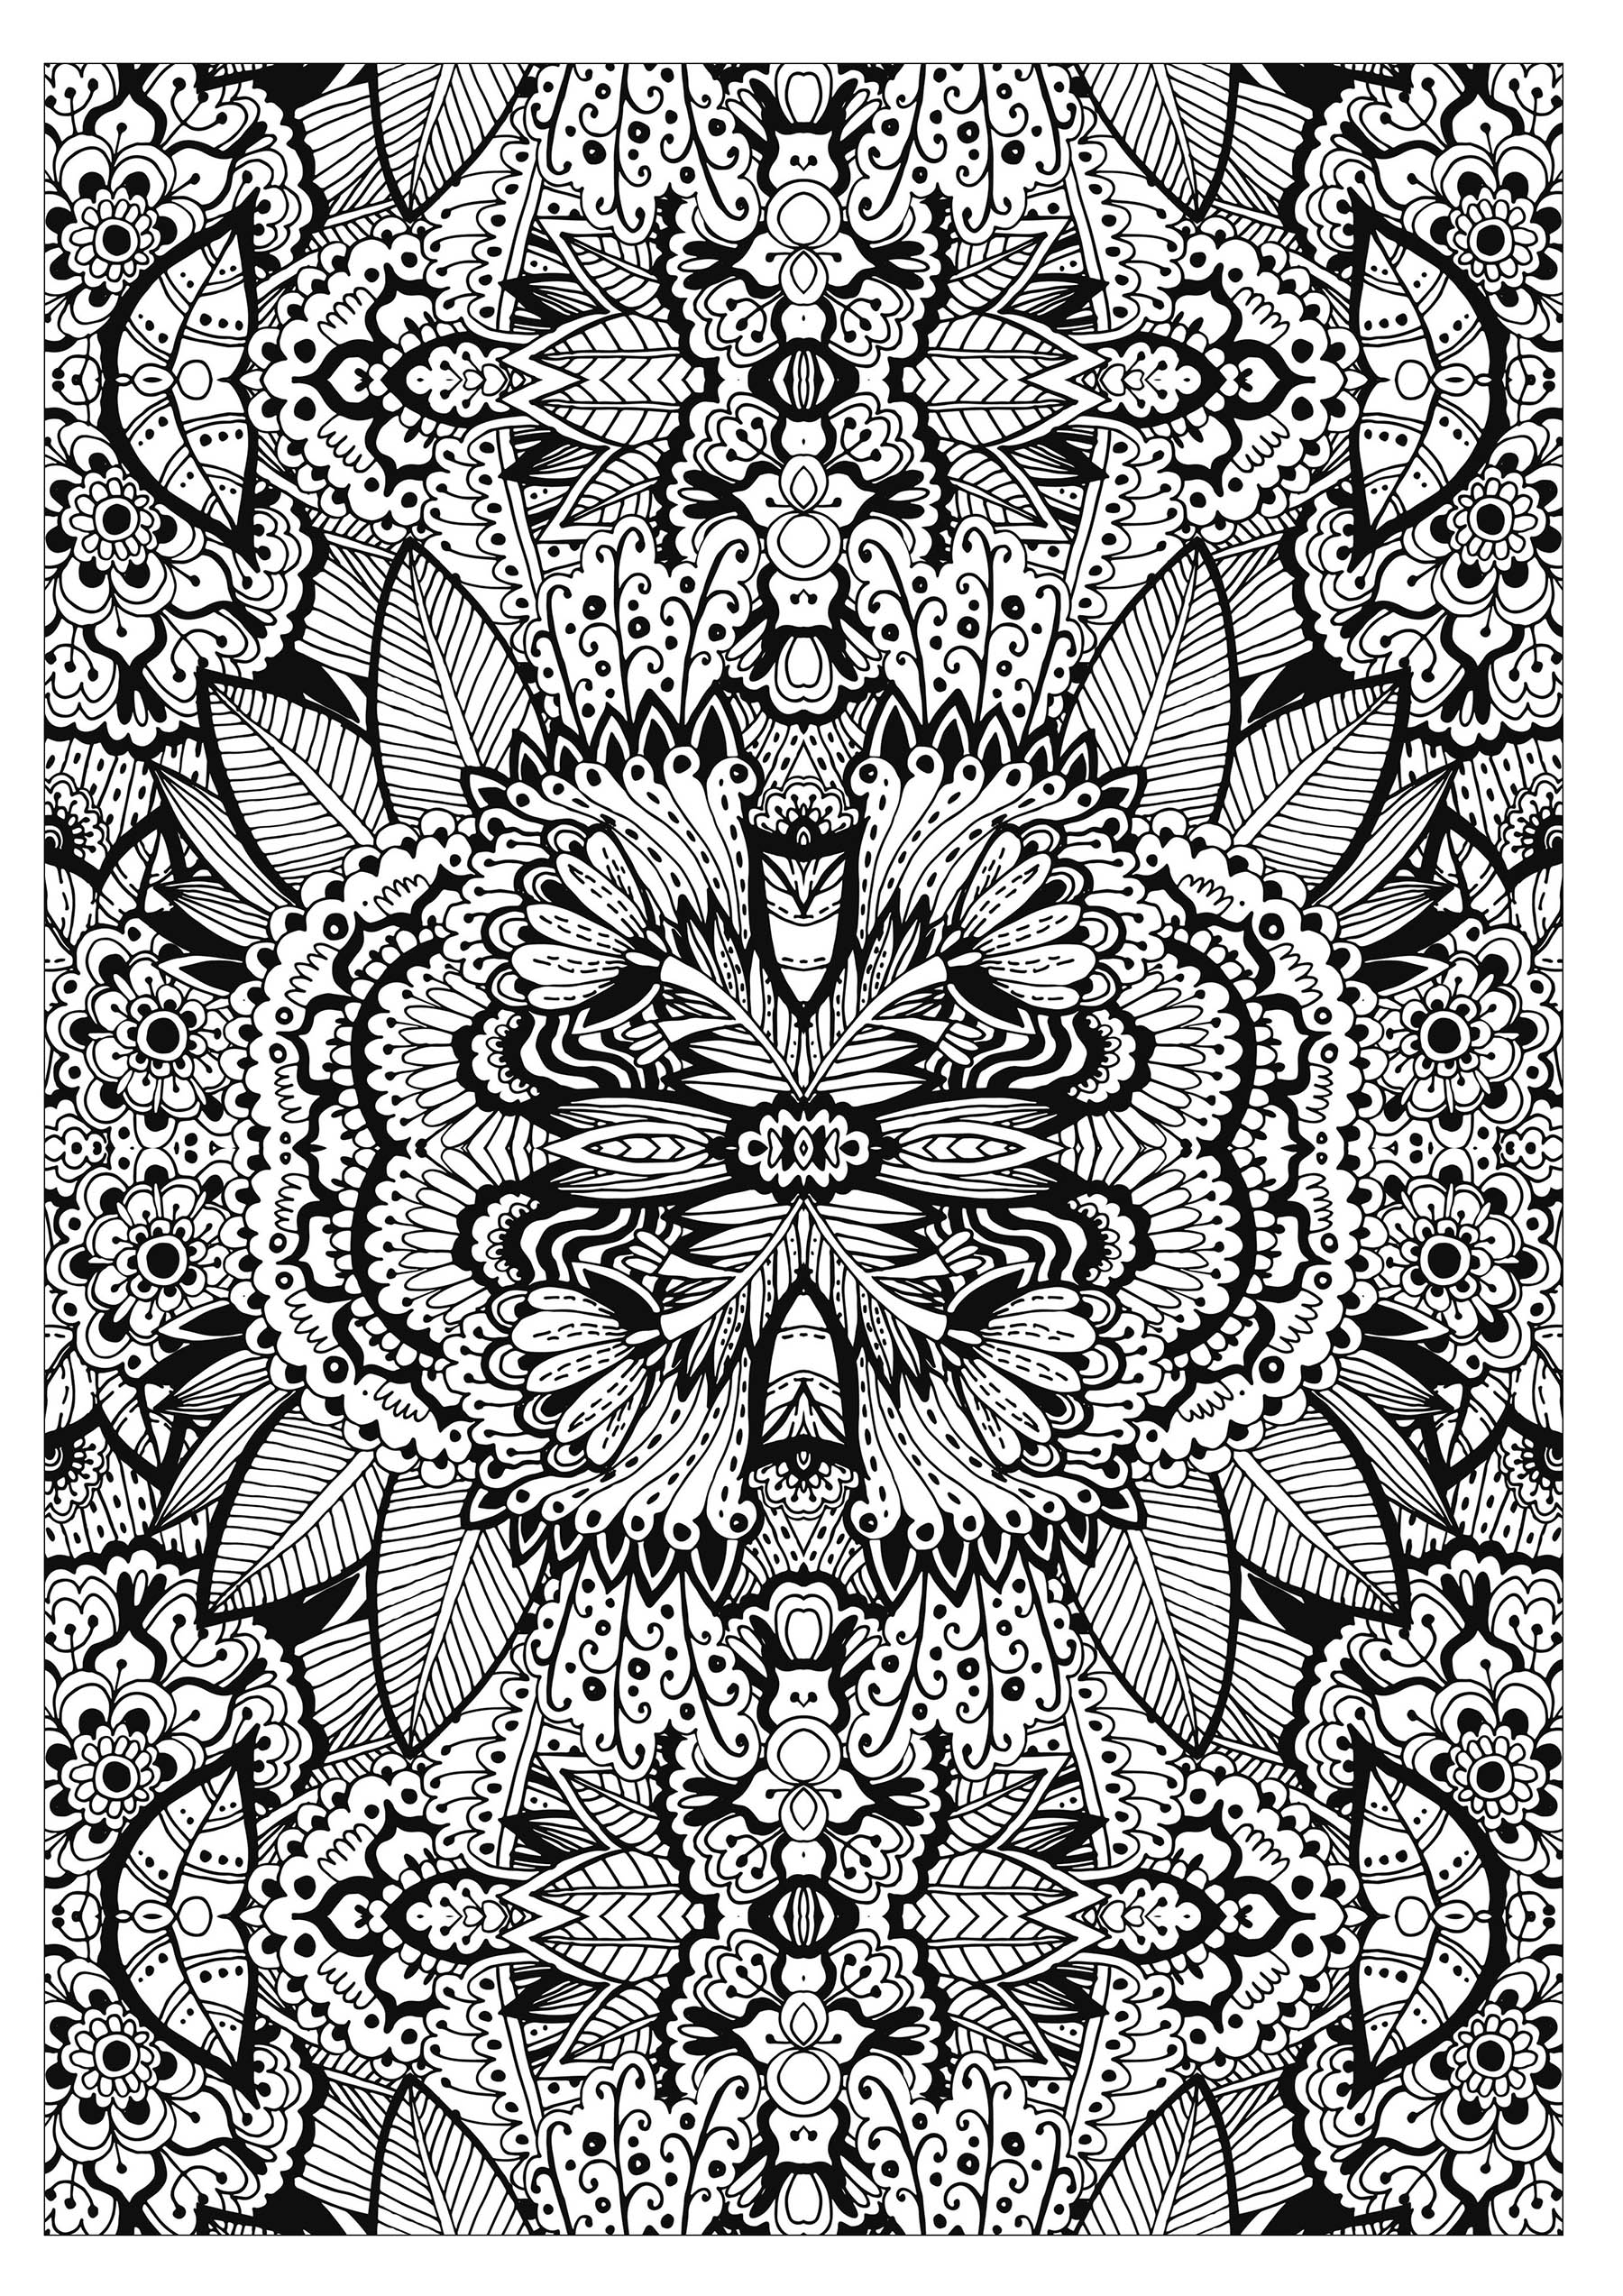 'Flower carpet' : A very very complex coloring page ! Squared version, Artist : Valeriia Lelanina